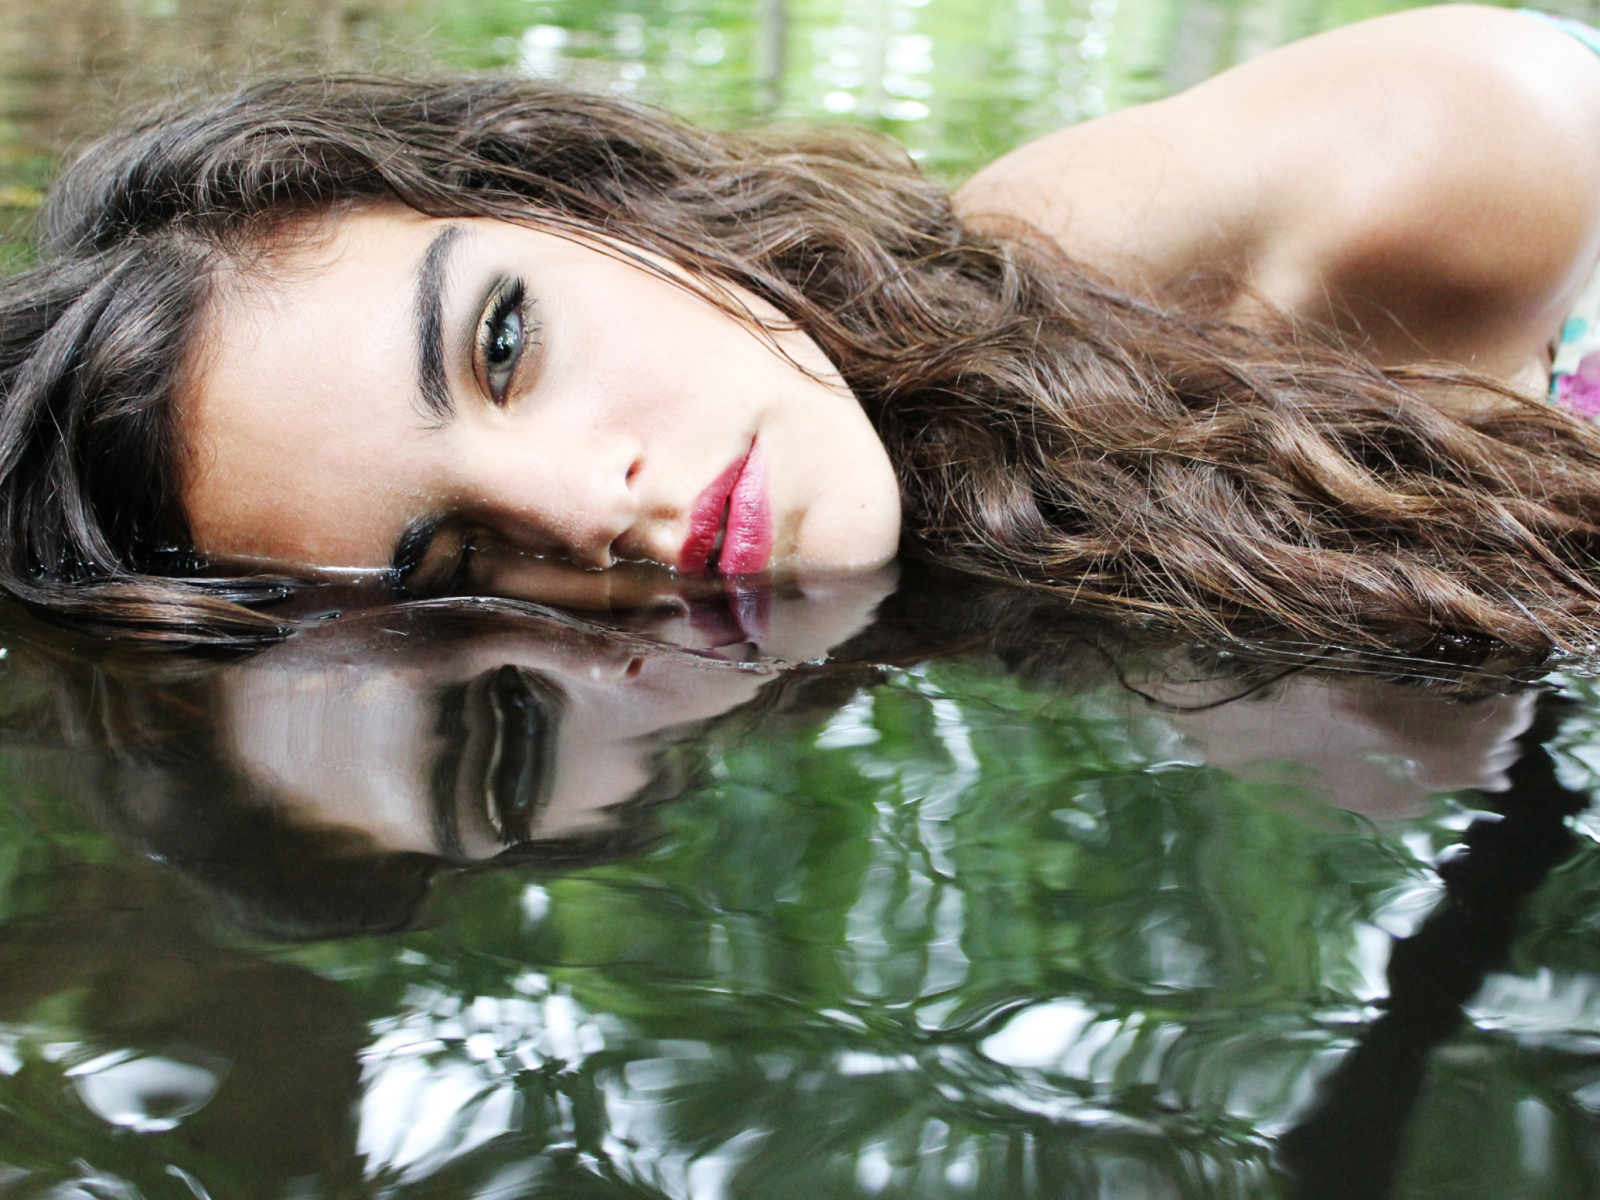 Beautiful Model And Reflection In Water wallpaper 1600x1200